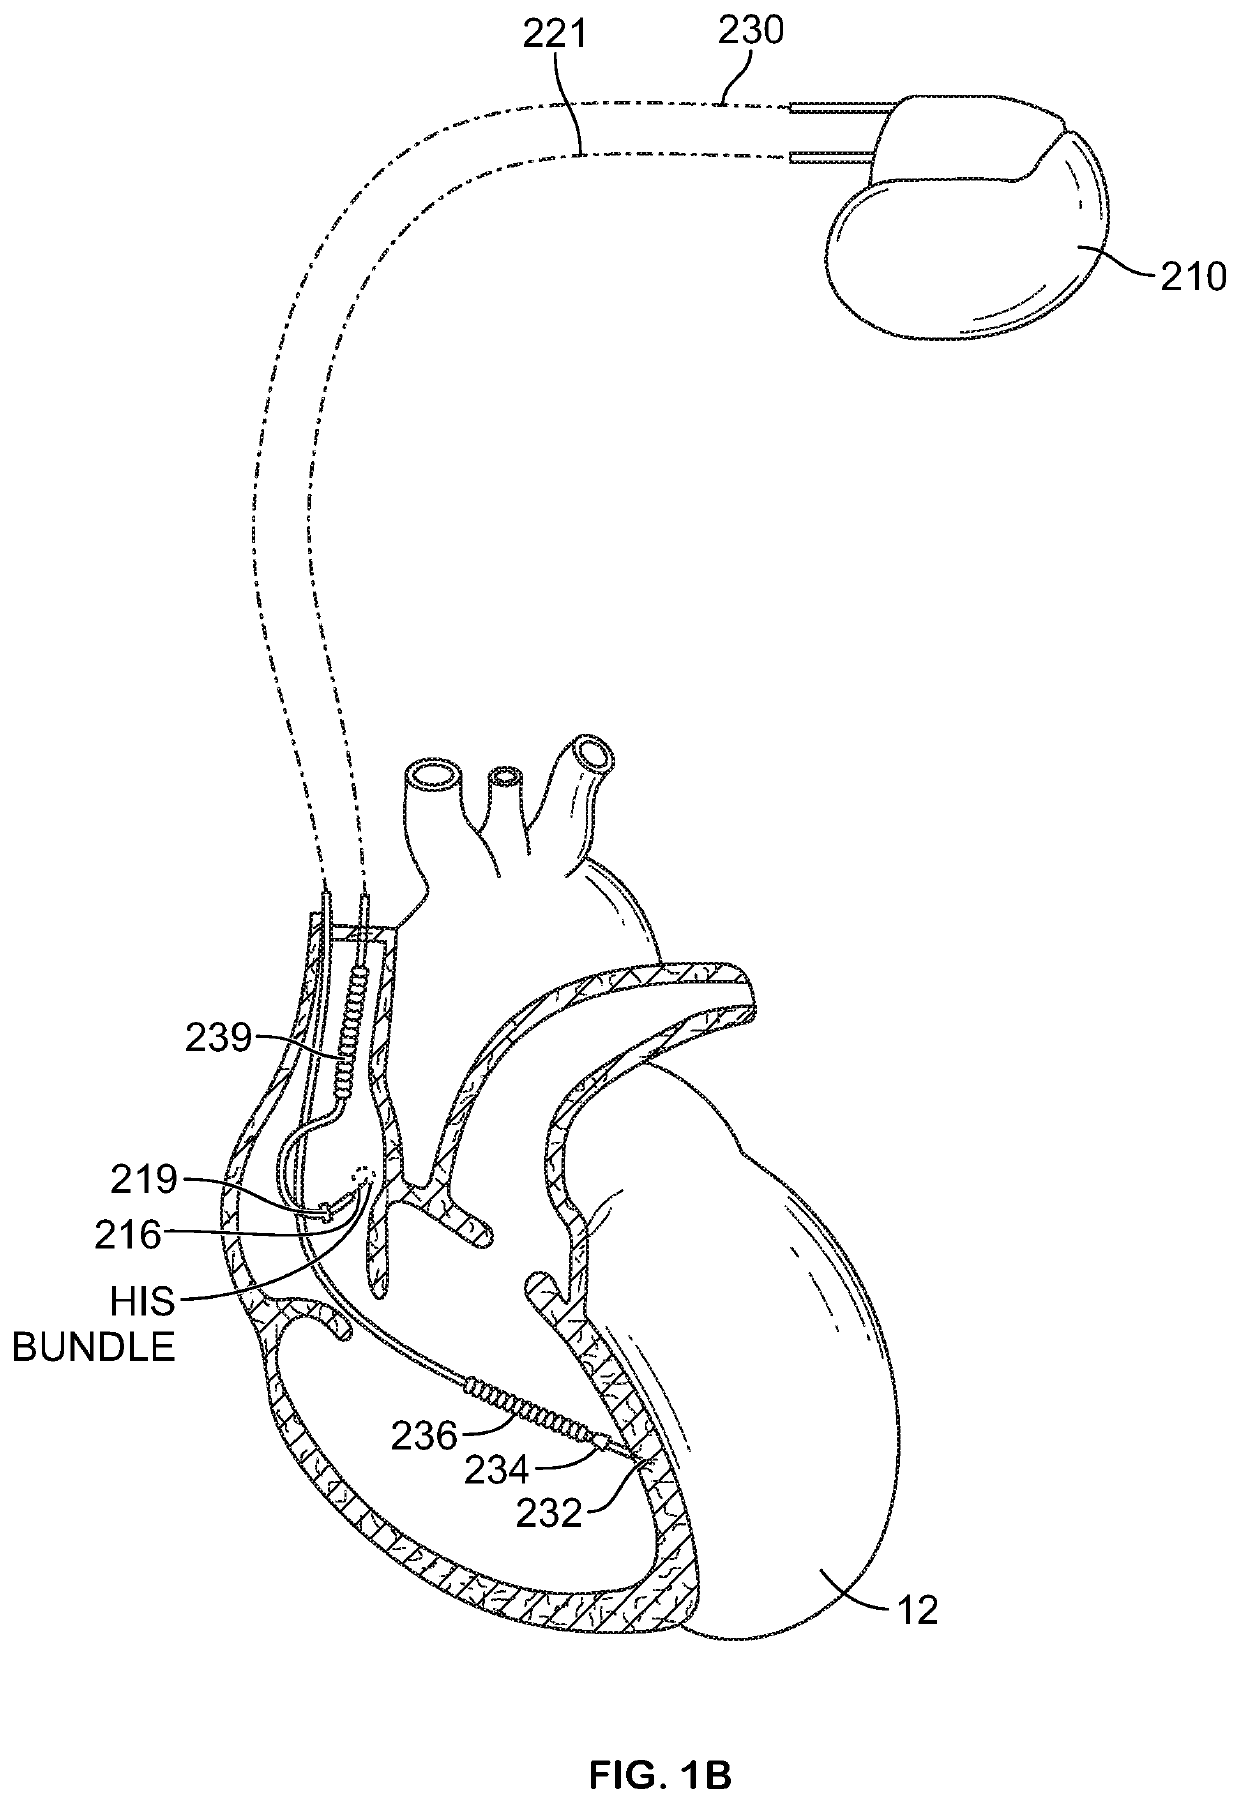 Systems and methods for managing atrial-ventricular delay adjustments